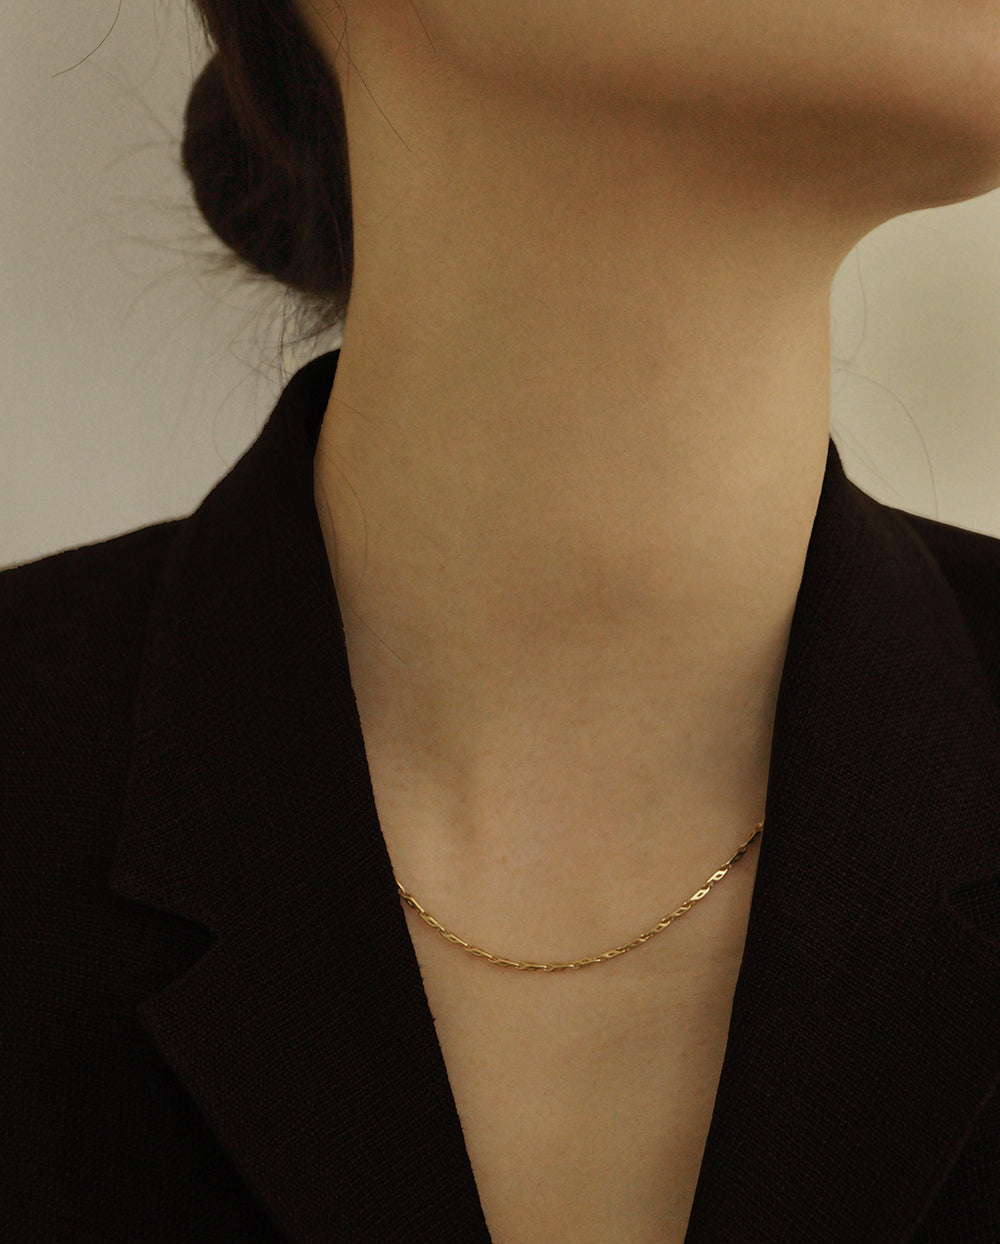 CITY CHAIN GOLD NECKLACE